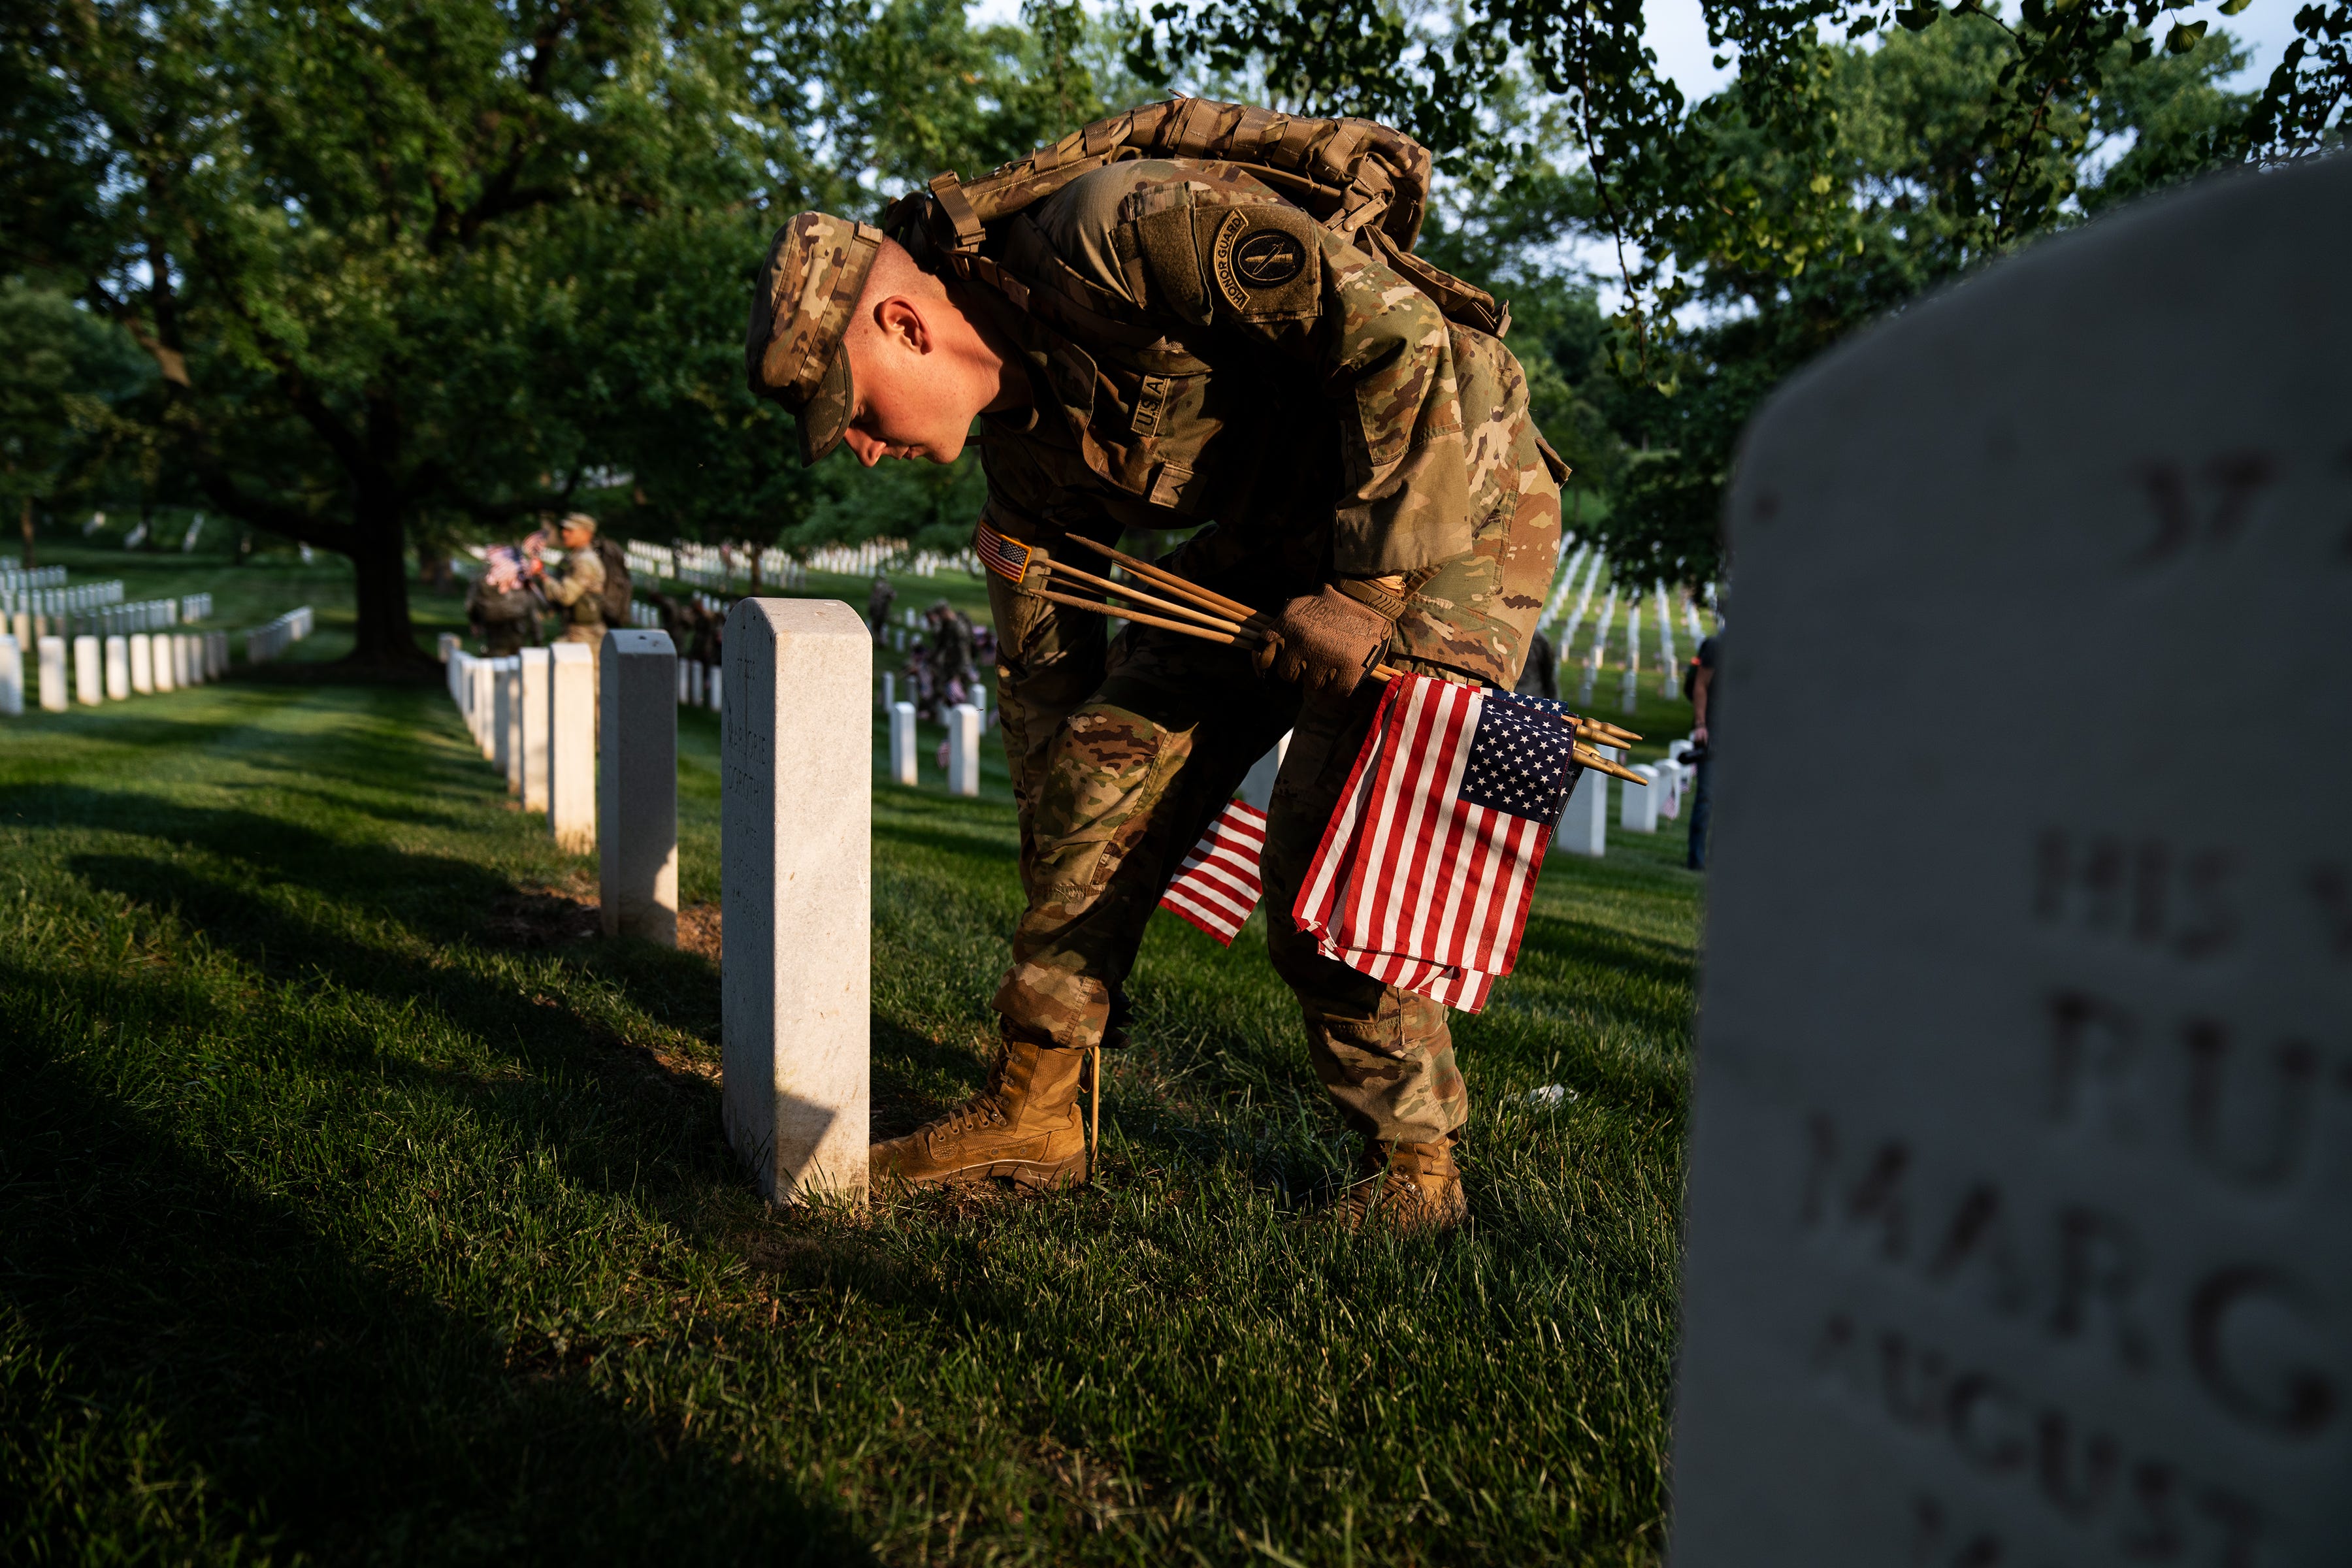 A member of the 3rd U.S. Infantry Regiment places a flag into the ground, exactly one boot length from the headstone's base during a joint service “Flags-In” ceremony at Arlington National Cemetery on Thursday, May 25, 2023.